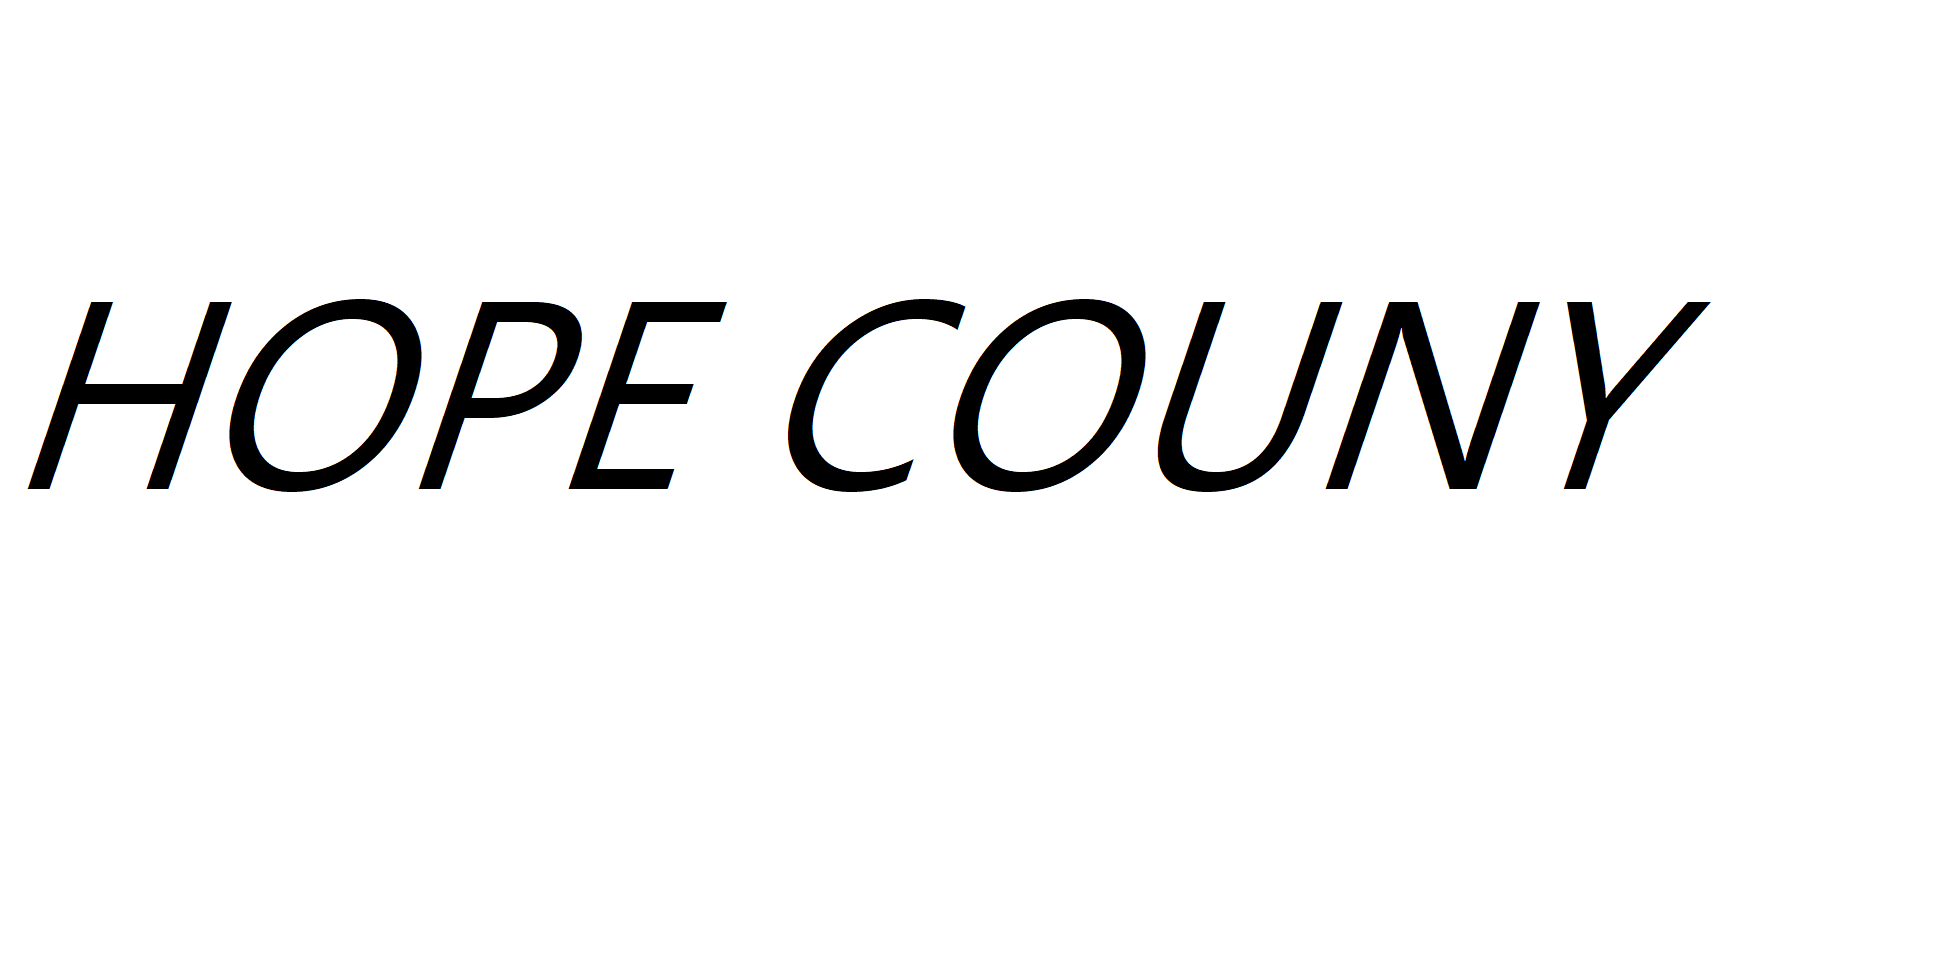 Country-name.png